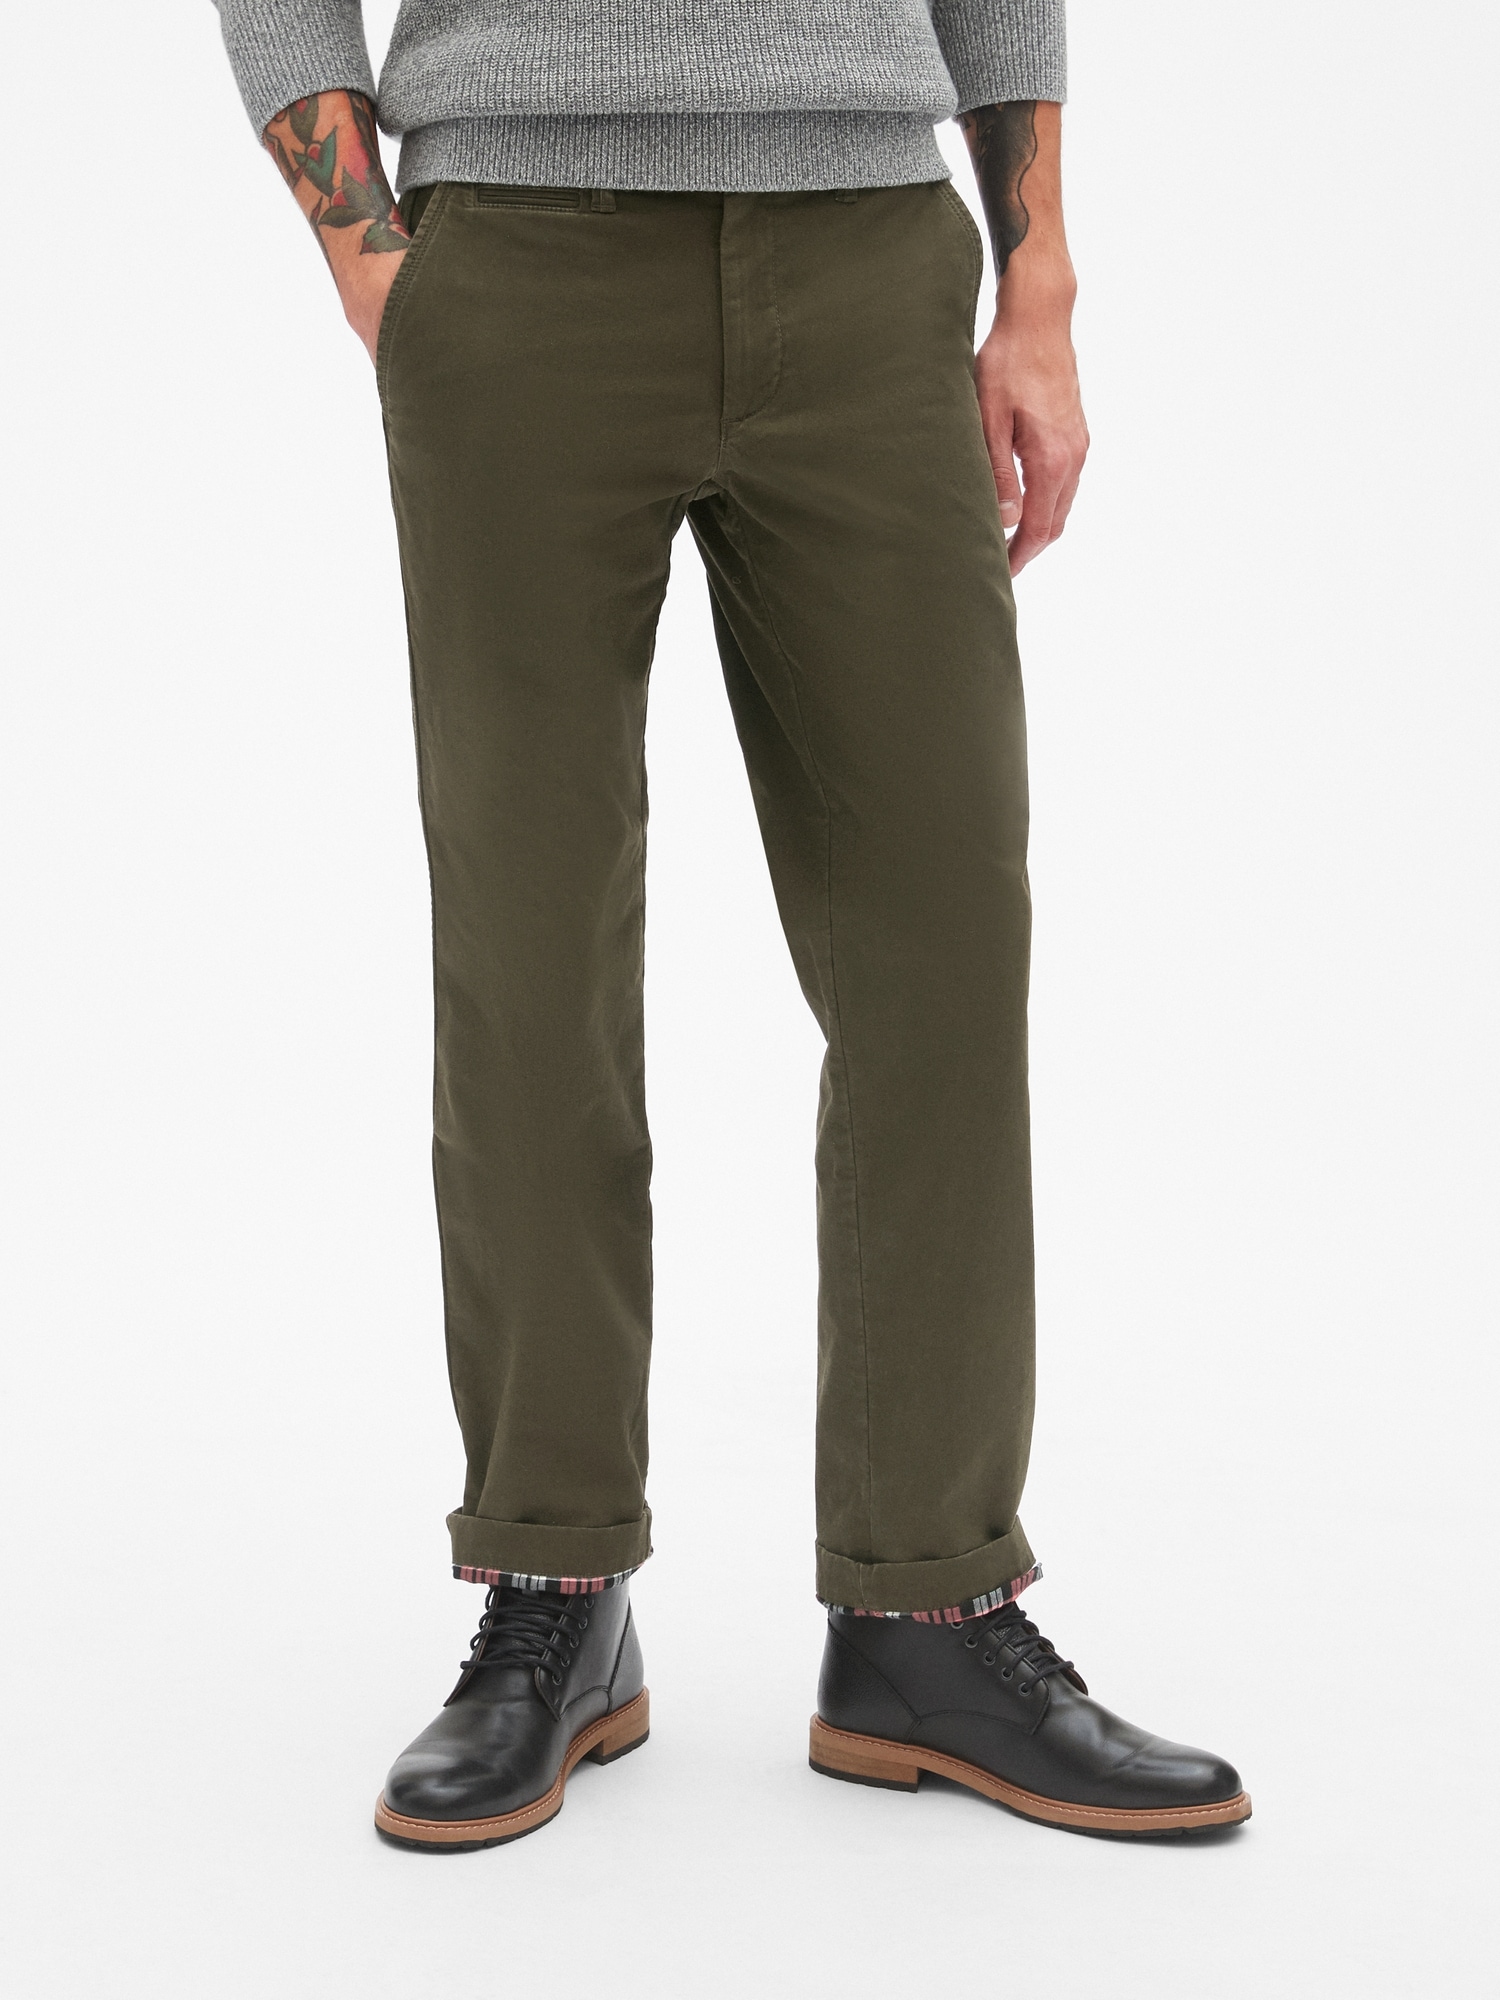 Flannel-Lined Khakis in Straight Fit with GapFlex | Gap